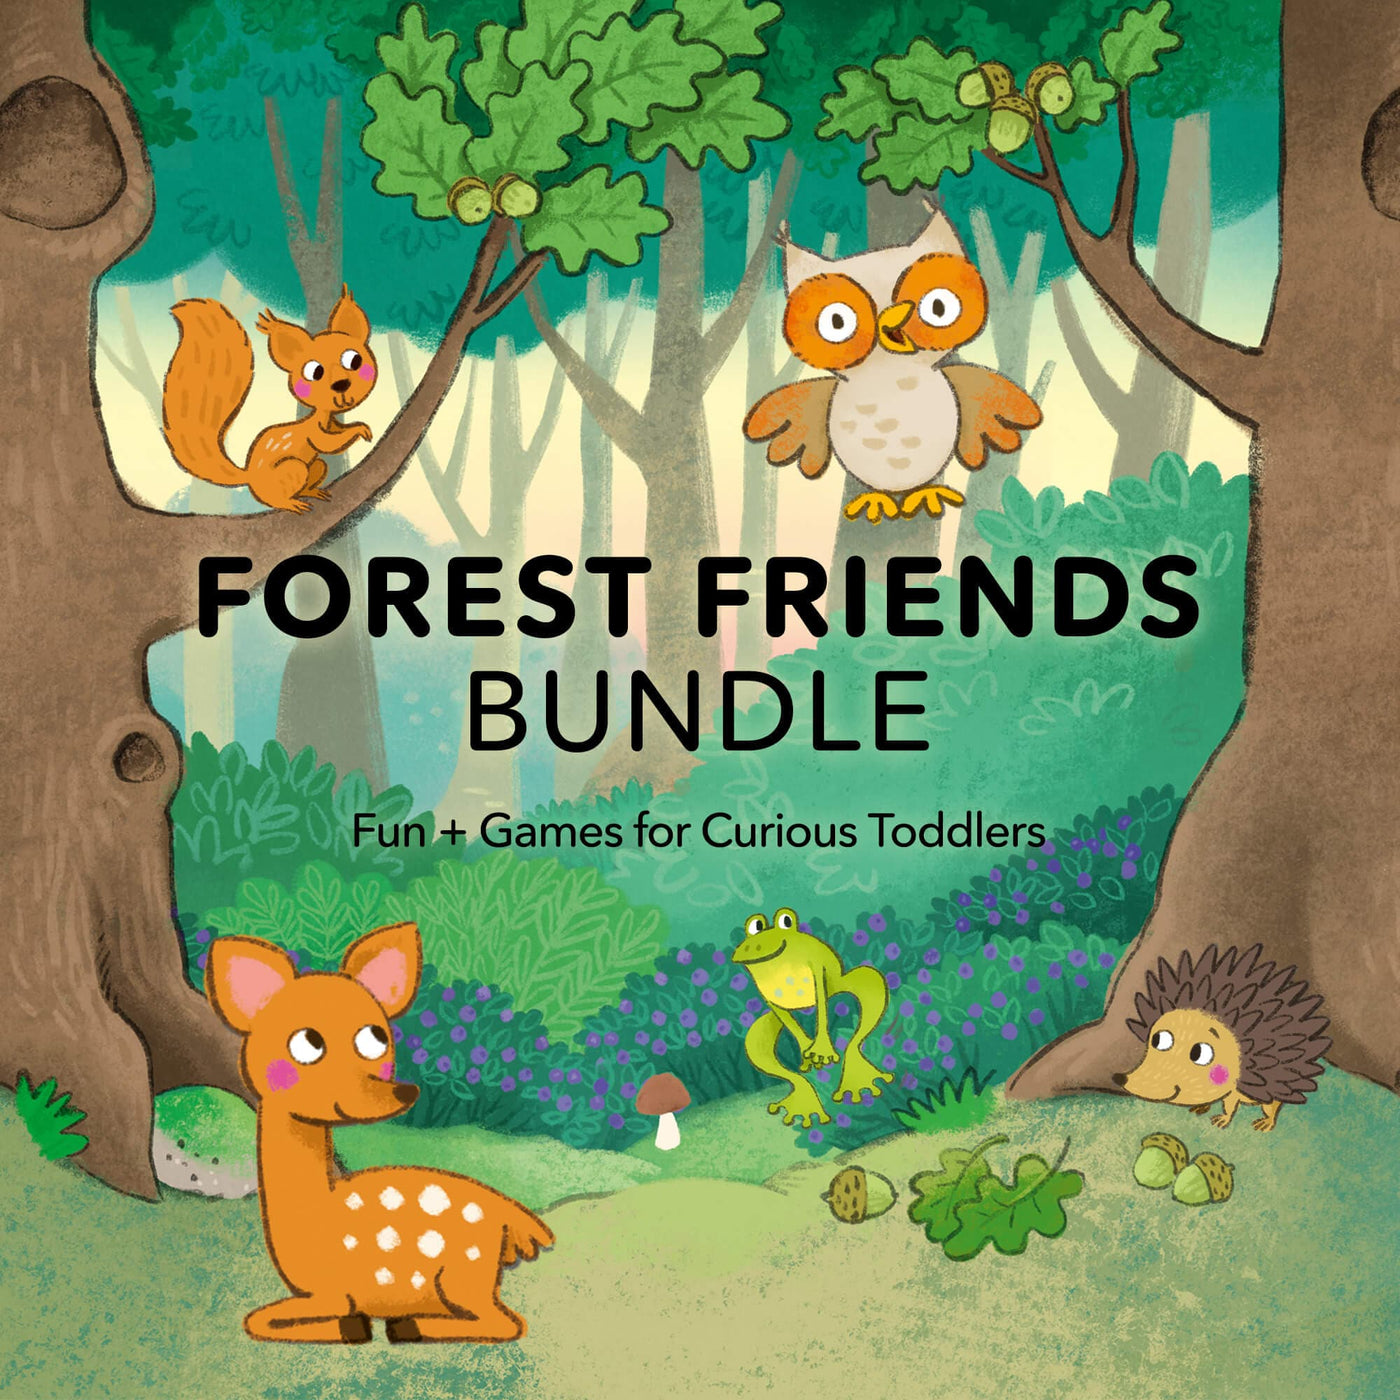 Forest Friends Bundle - for and games for curious toddlers